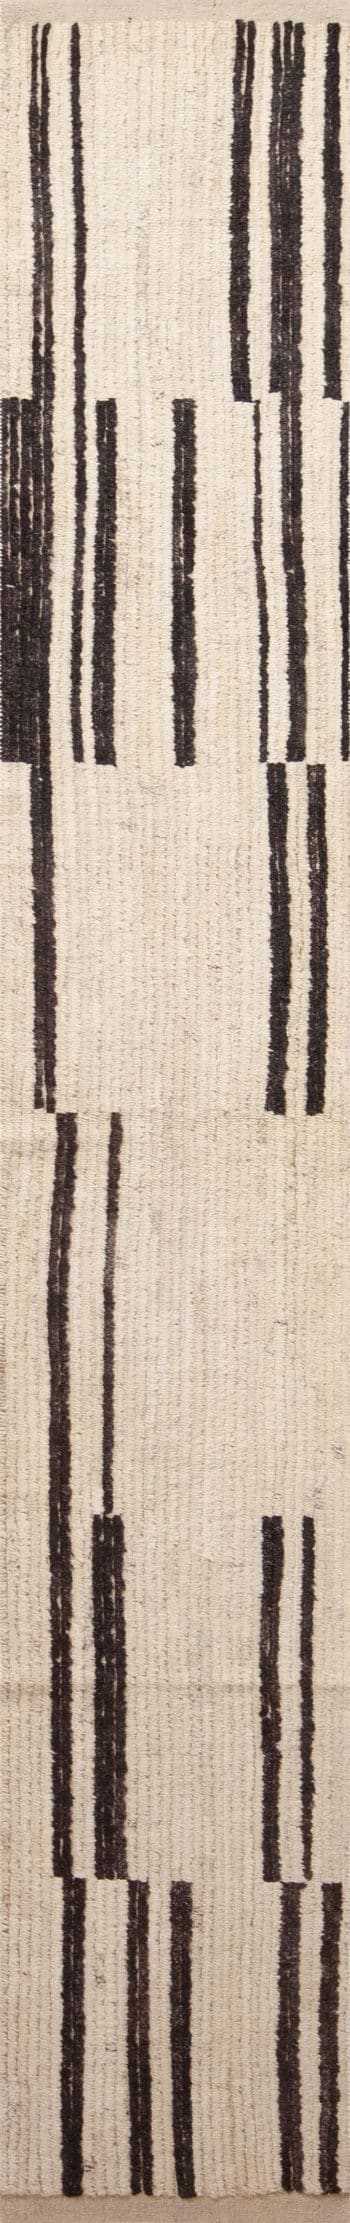 Minimalist Primitive Pattern Light Cream and Charcoal Color Modern Hallway Runner Rug 11880 by Nazmiyal Antique rugs